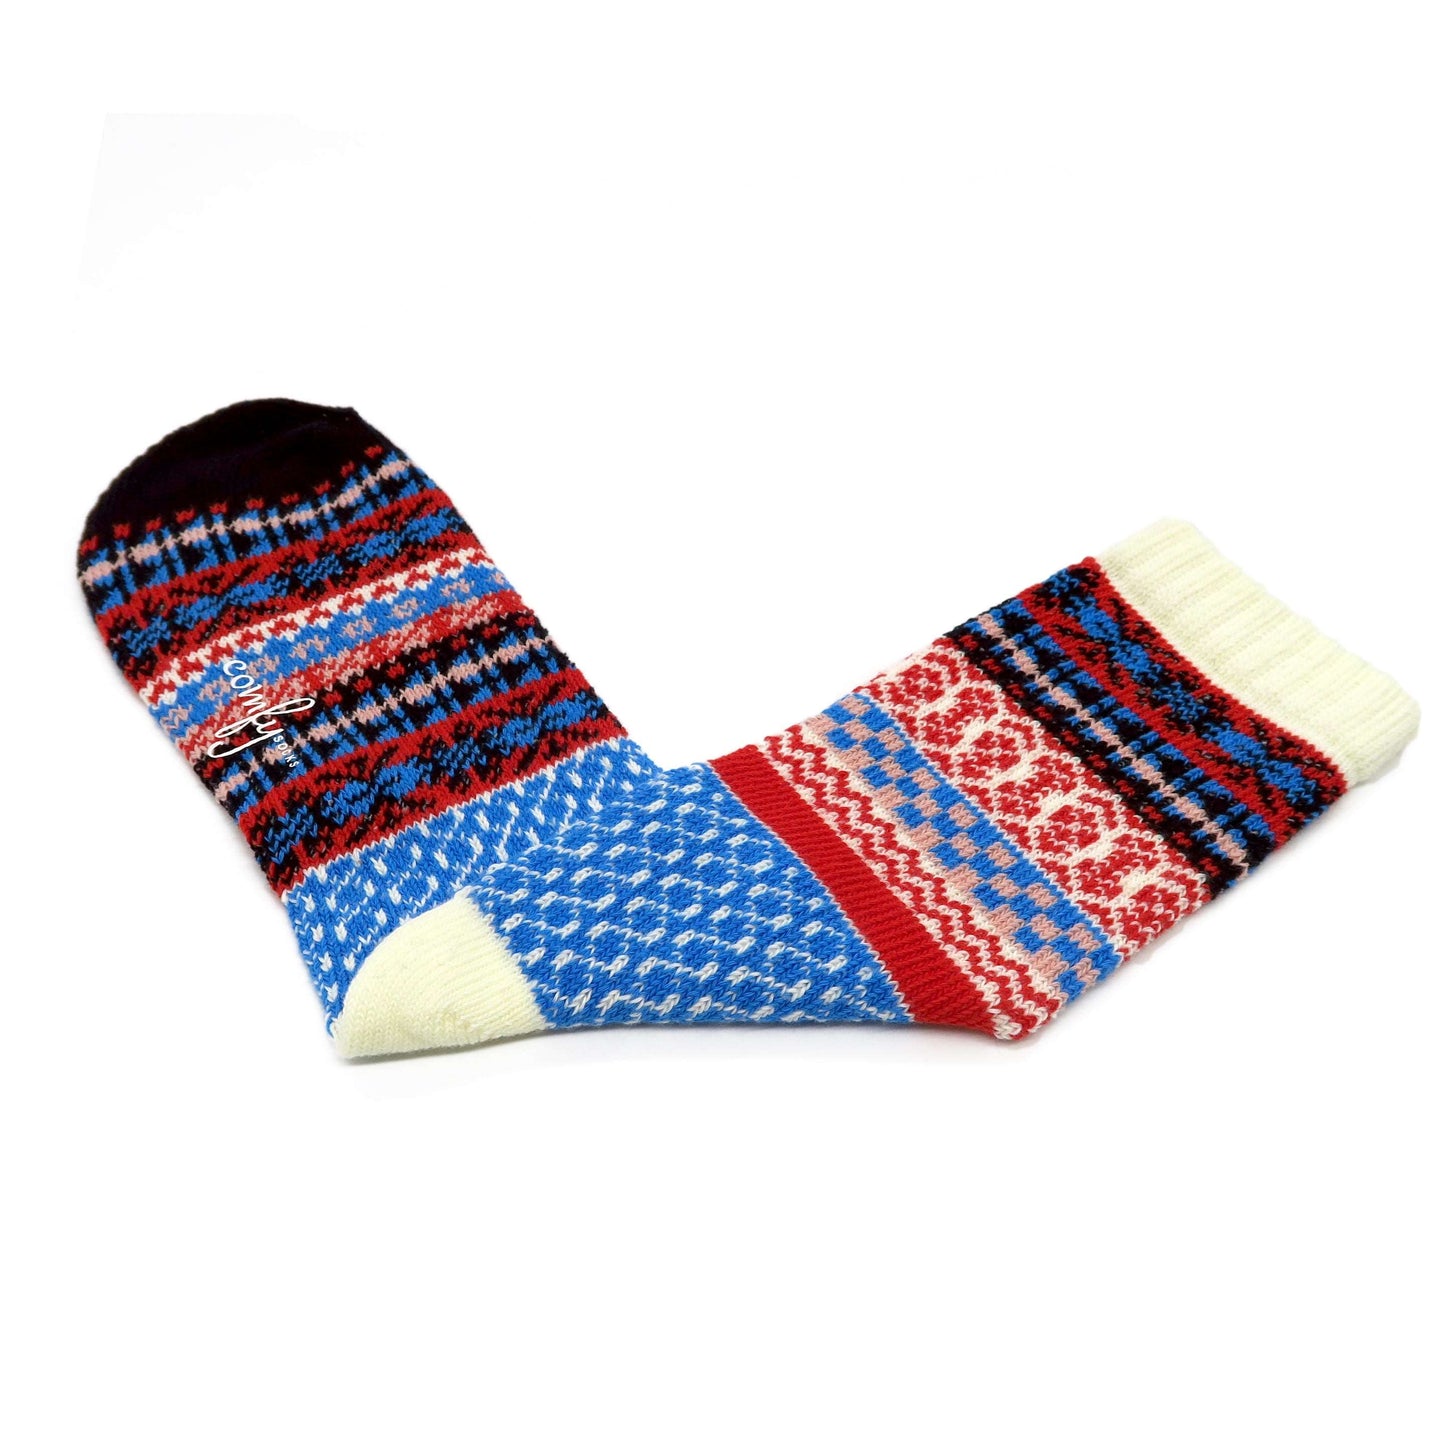 tribal pattern socks - white, blue and red color